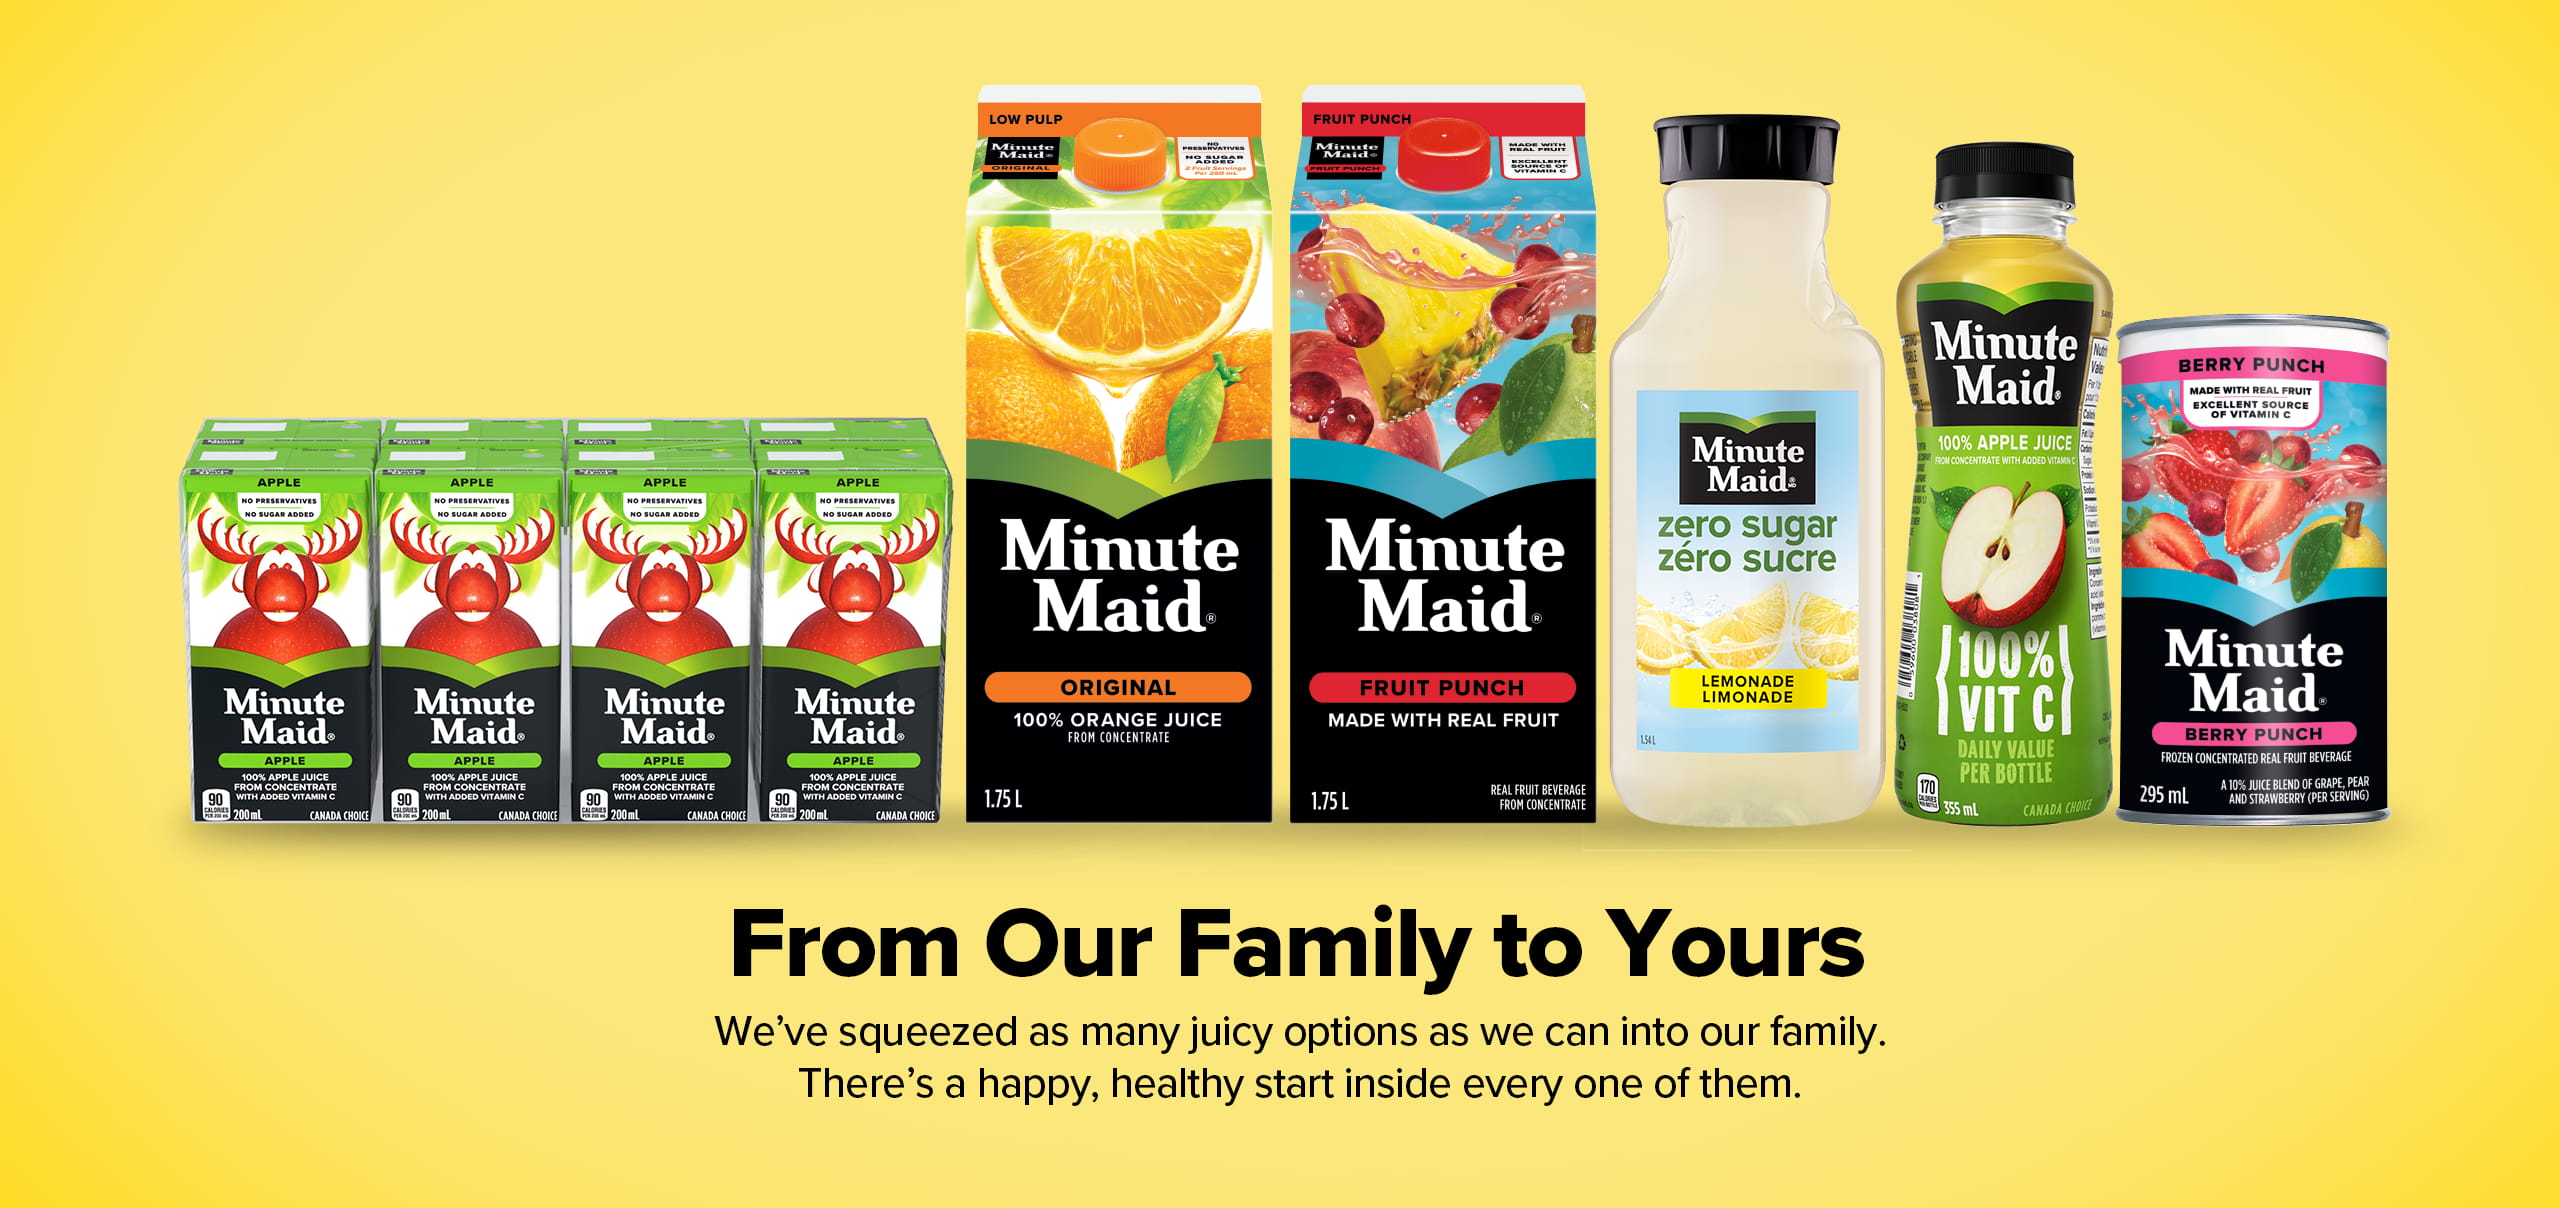 Minute Maid. From Our Family to Yours. We've squeezed as many juicy options as we can into our family. There's a happy, healthy start inside every one of them.